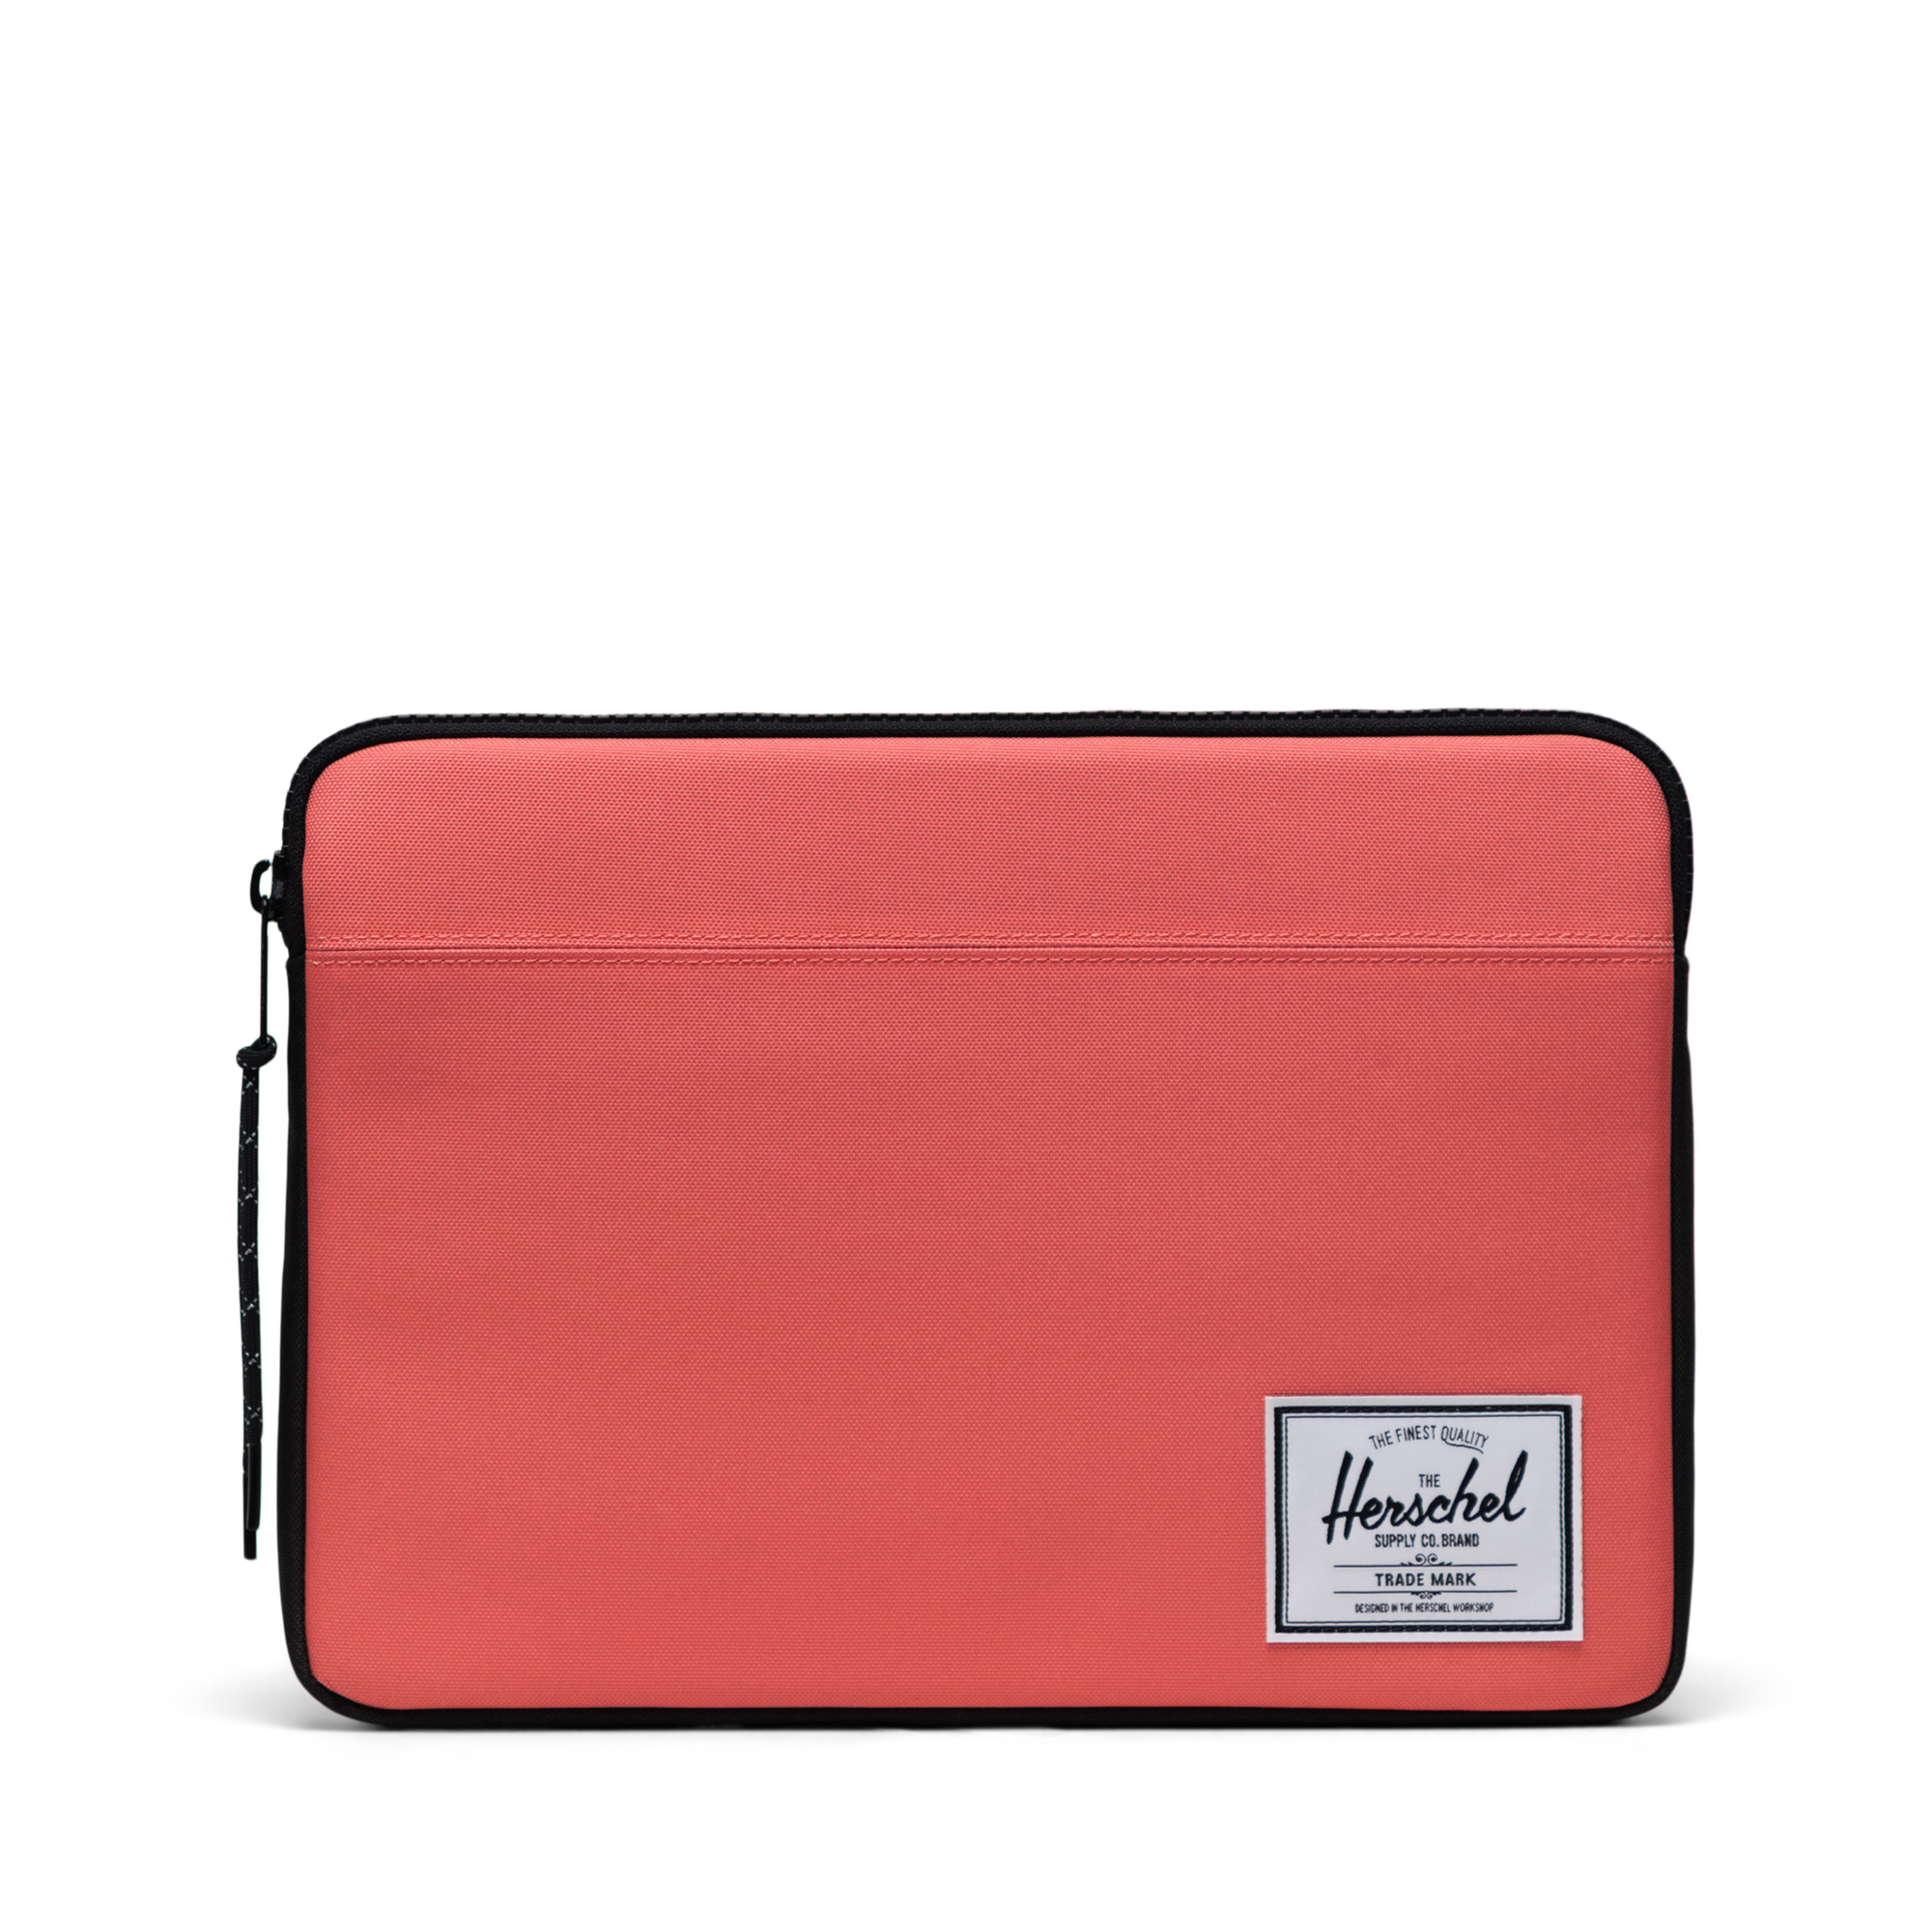 Herschel Supply Co Anchor 13 Inch Laptop Sleeve In Pink/Gray